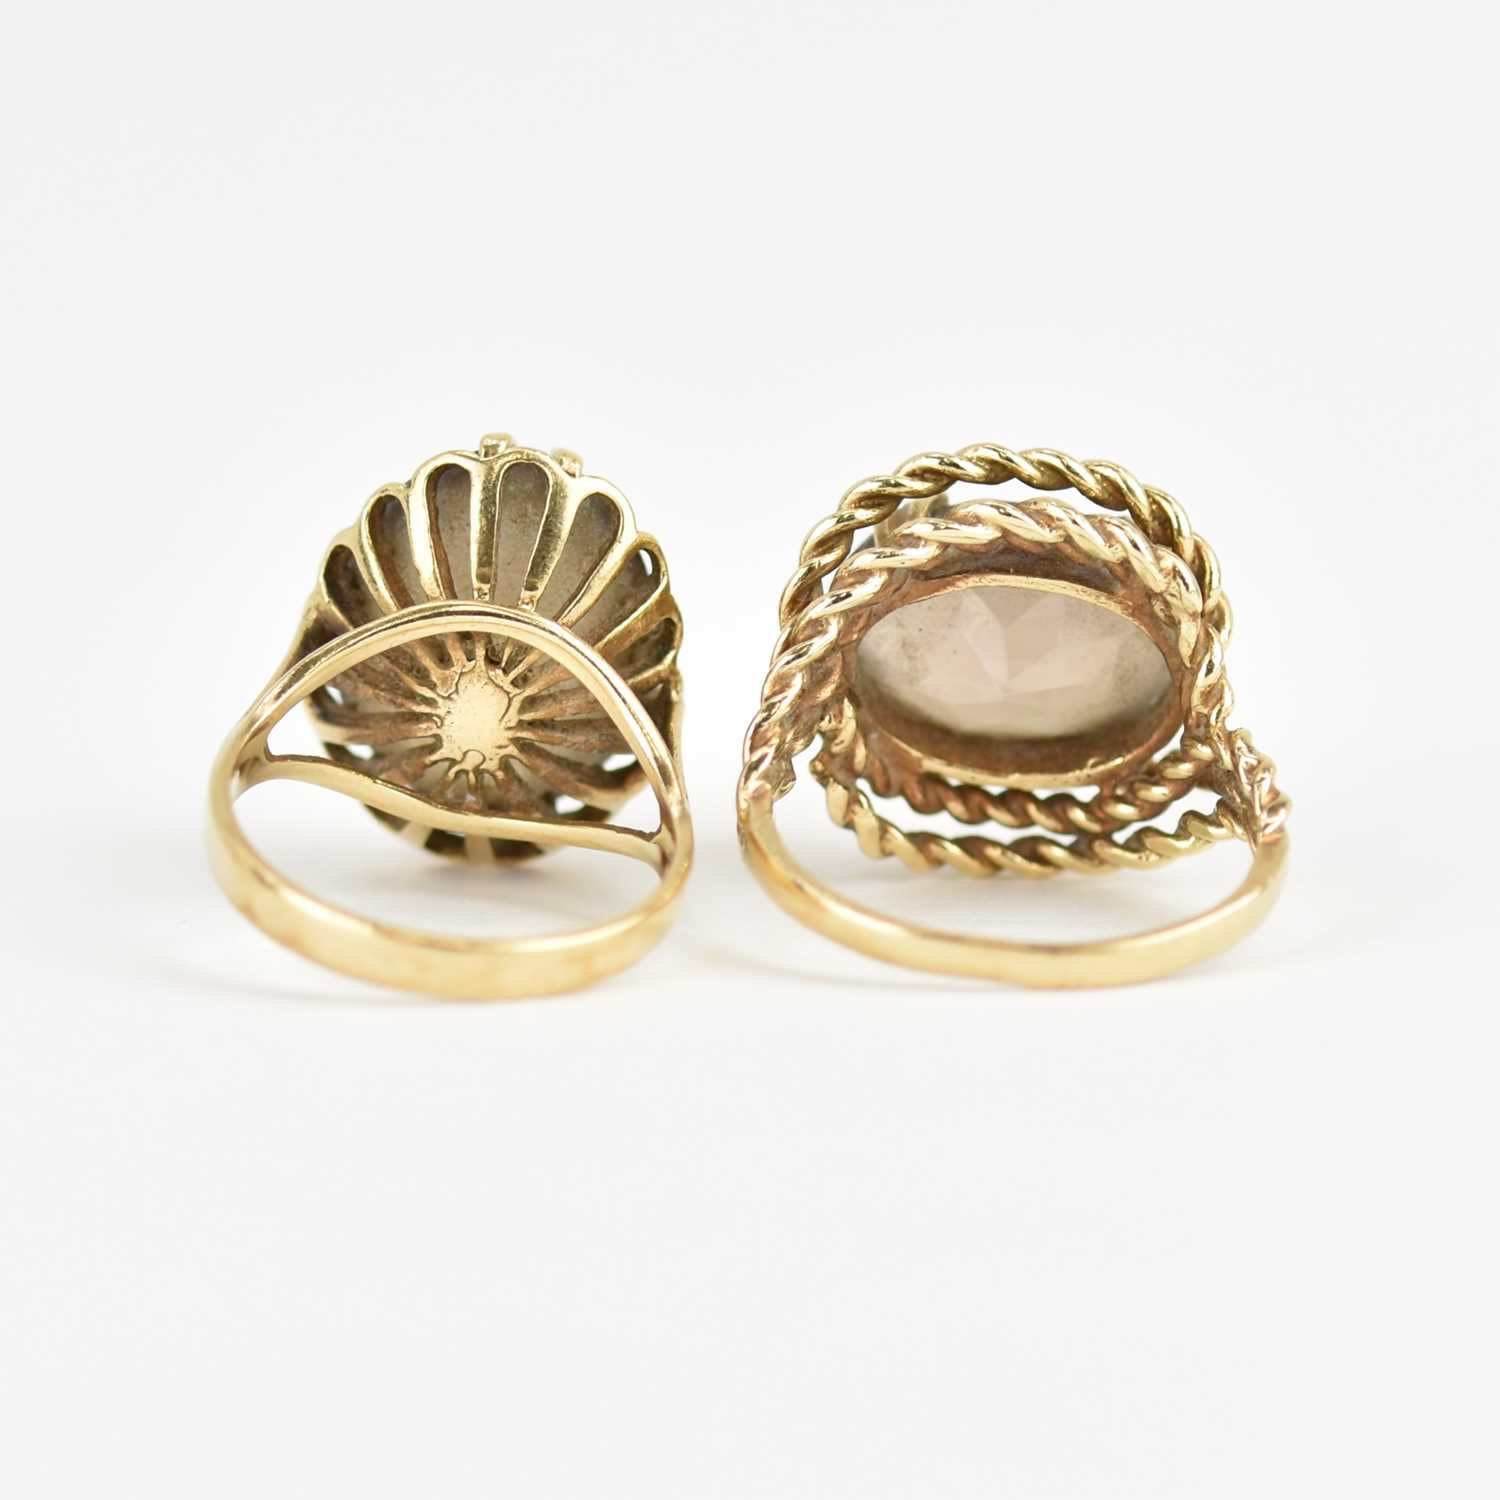 Two 9ct gold dress rings, both claw set with oval smoky quartz, one with rope twist mount, Size K - Image 3 of 3